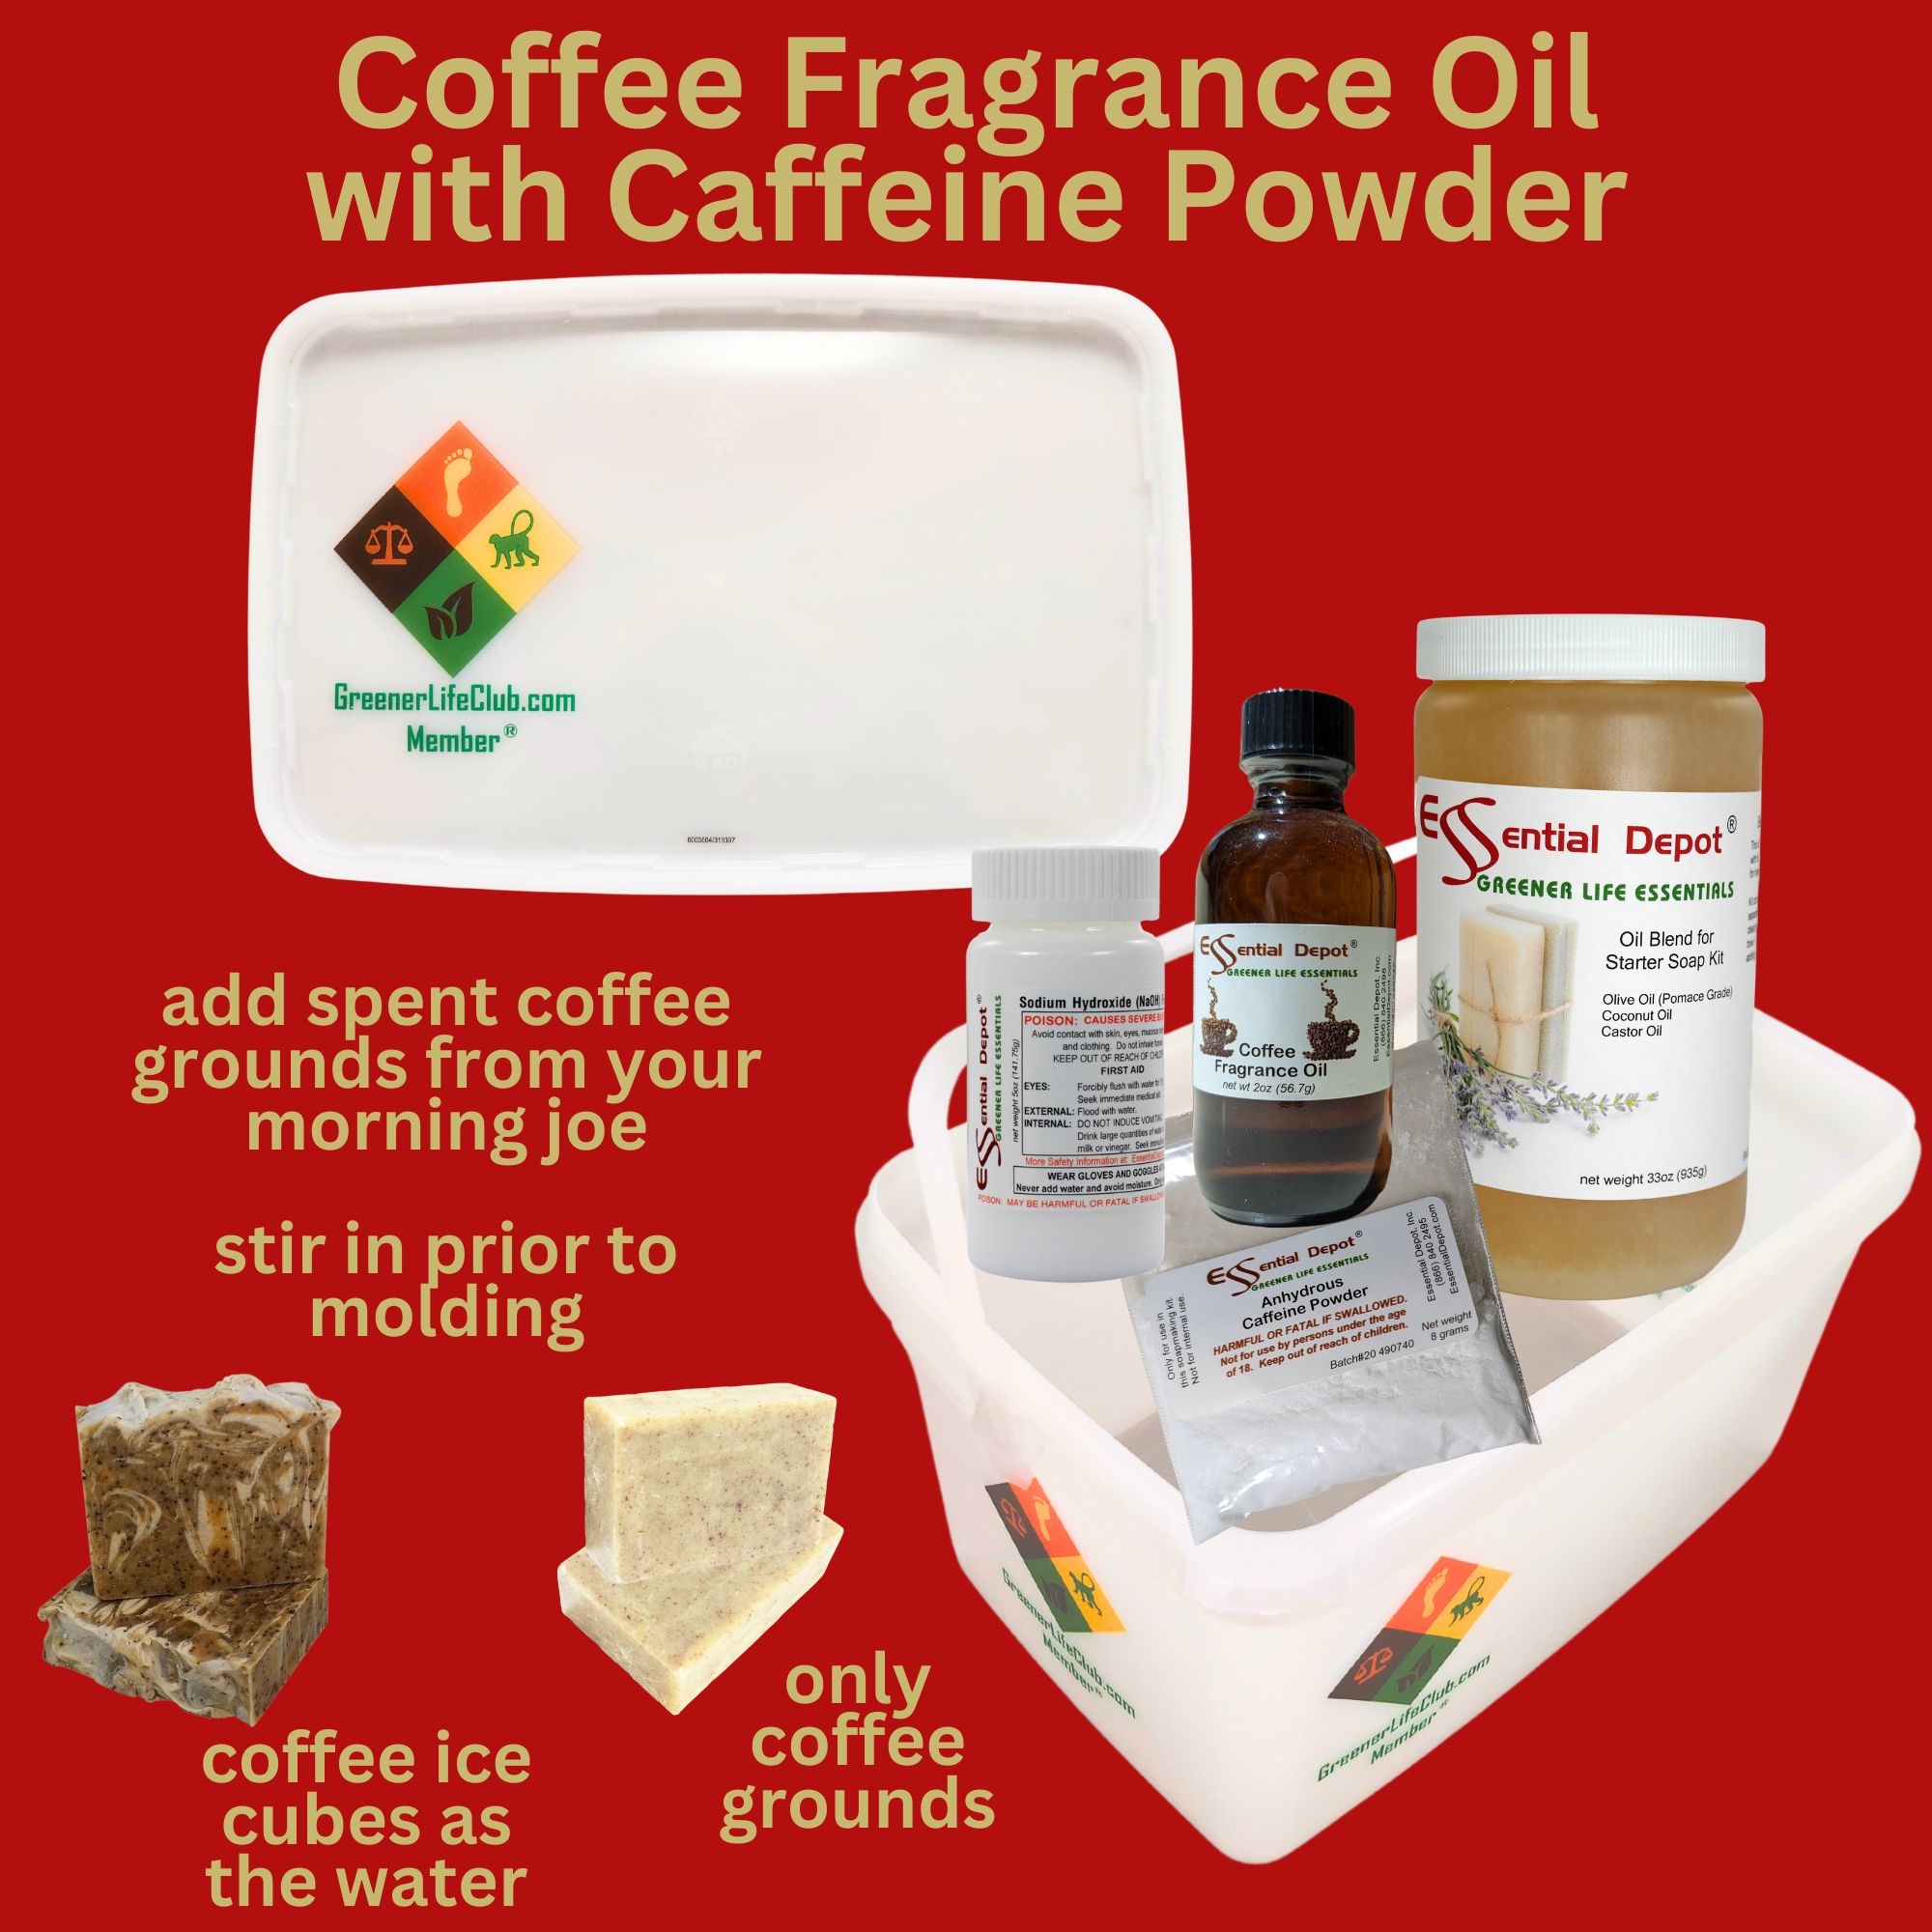 Coffee Fragrance Oil with Caffeine Powder (add your own coffee grounds)